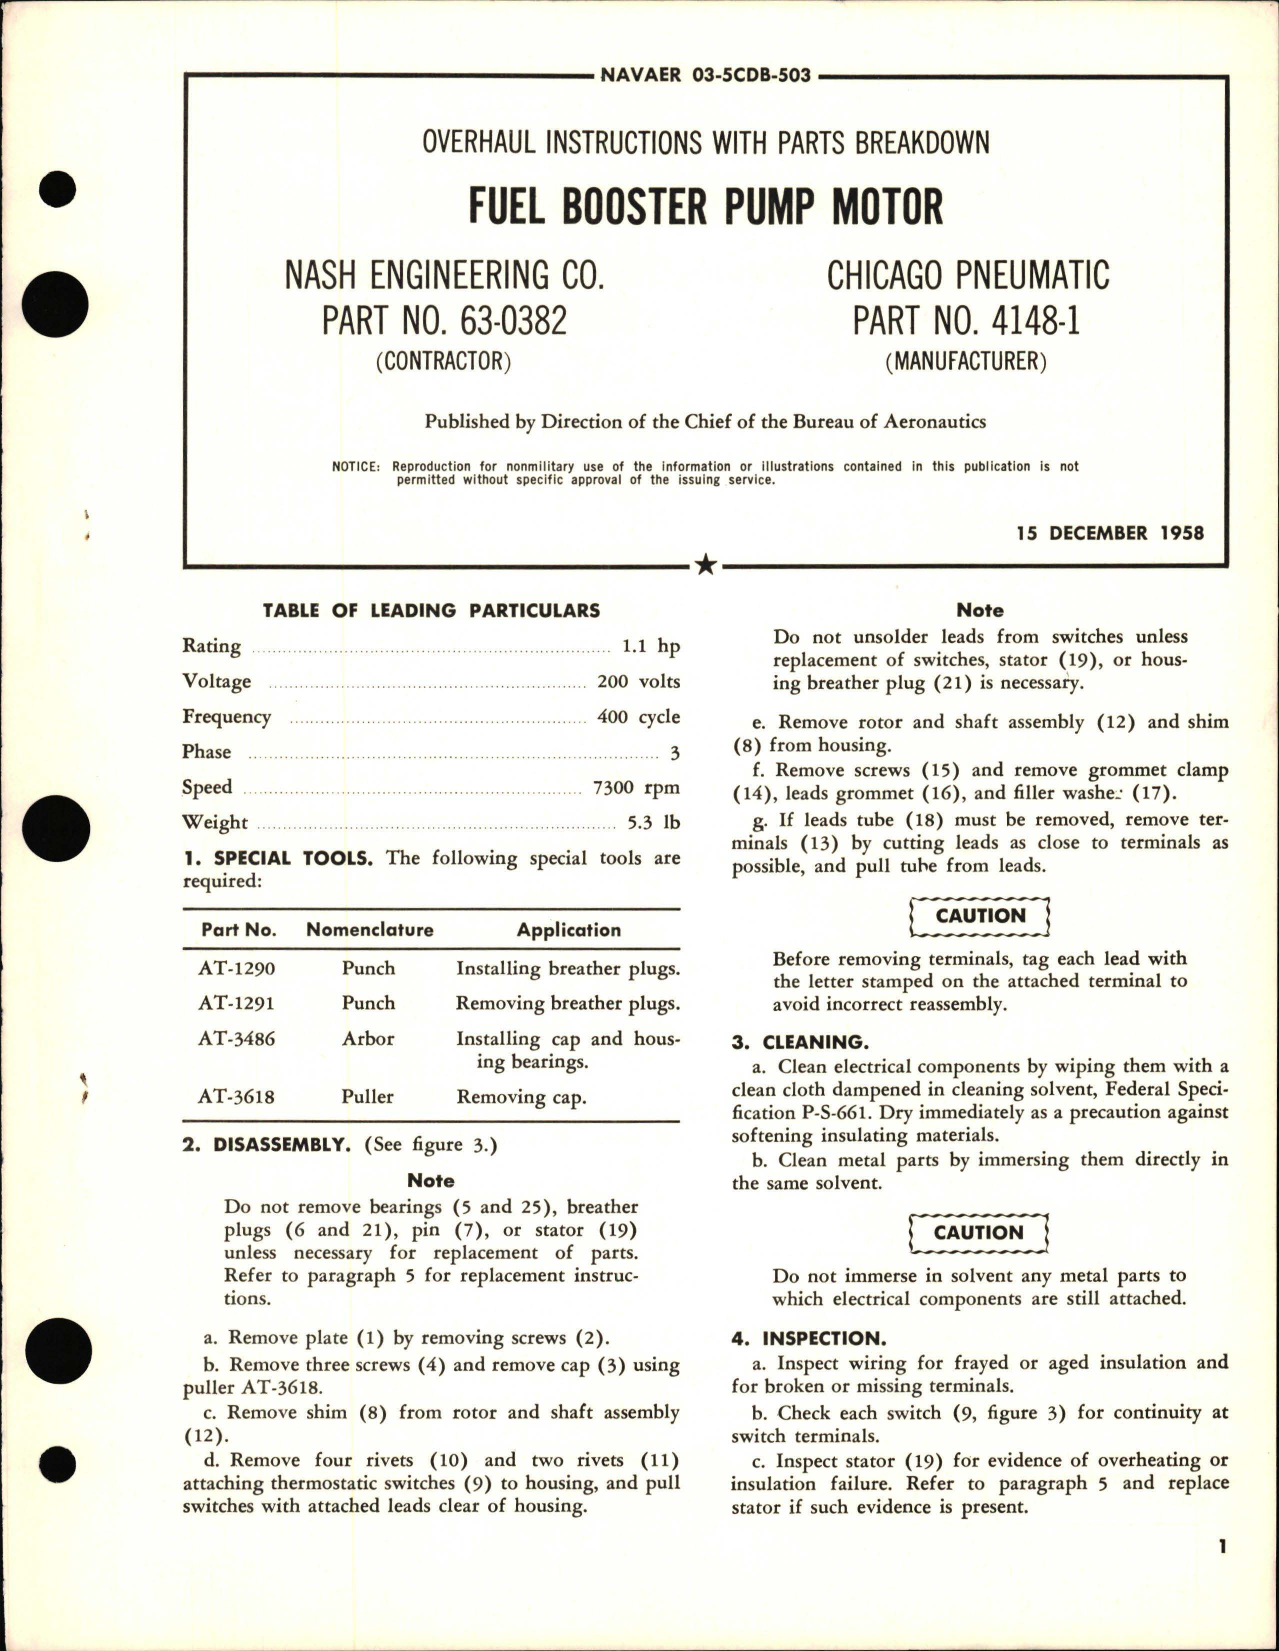 Sample page 1 from AirCorps Library document: Overhaul Instructions with Parts Breakdown for Fuel Booster Pump Motor - Part 63-0382 and 4148-1 